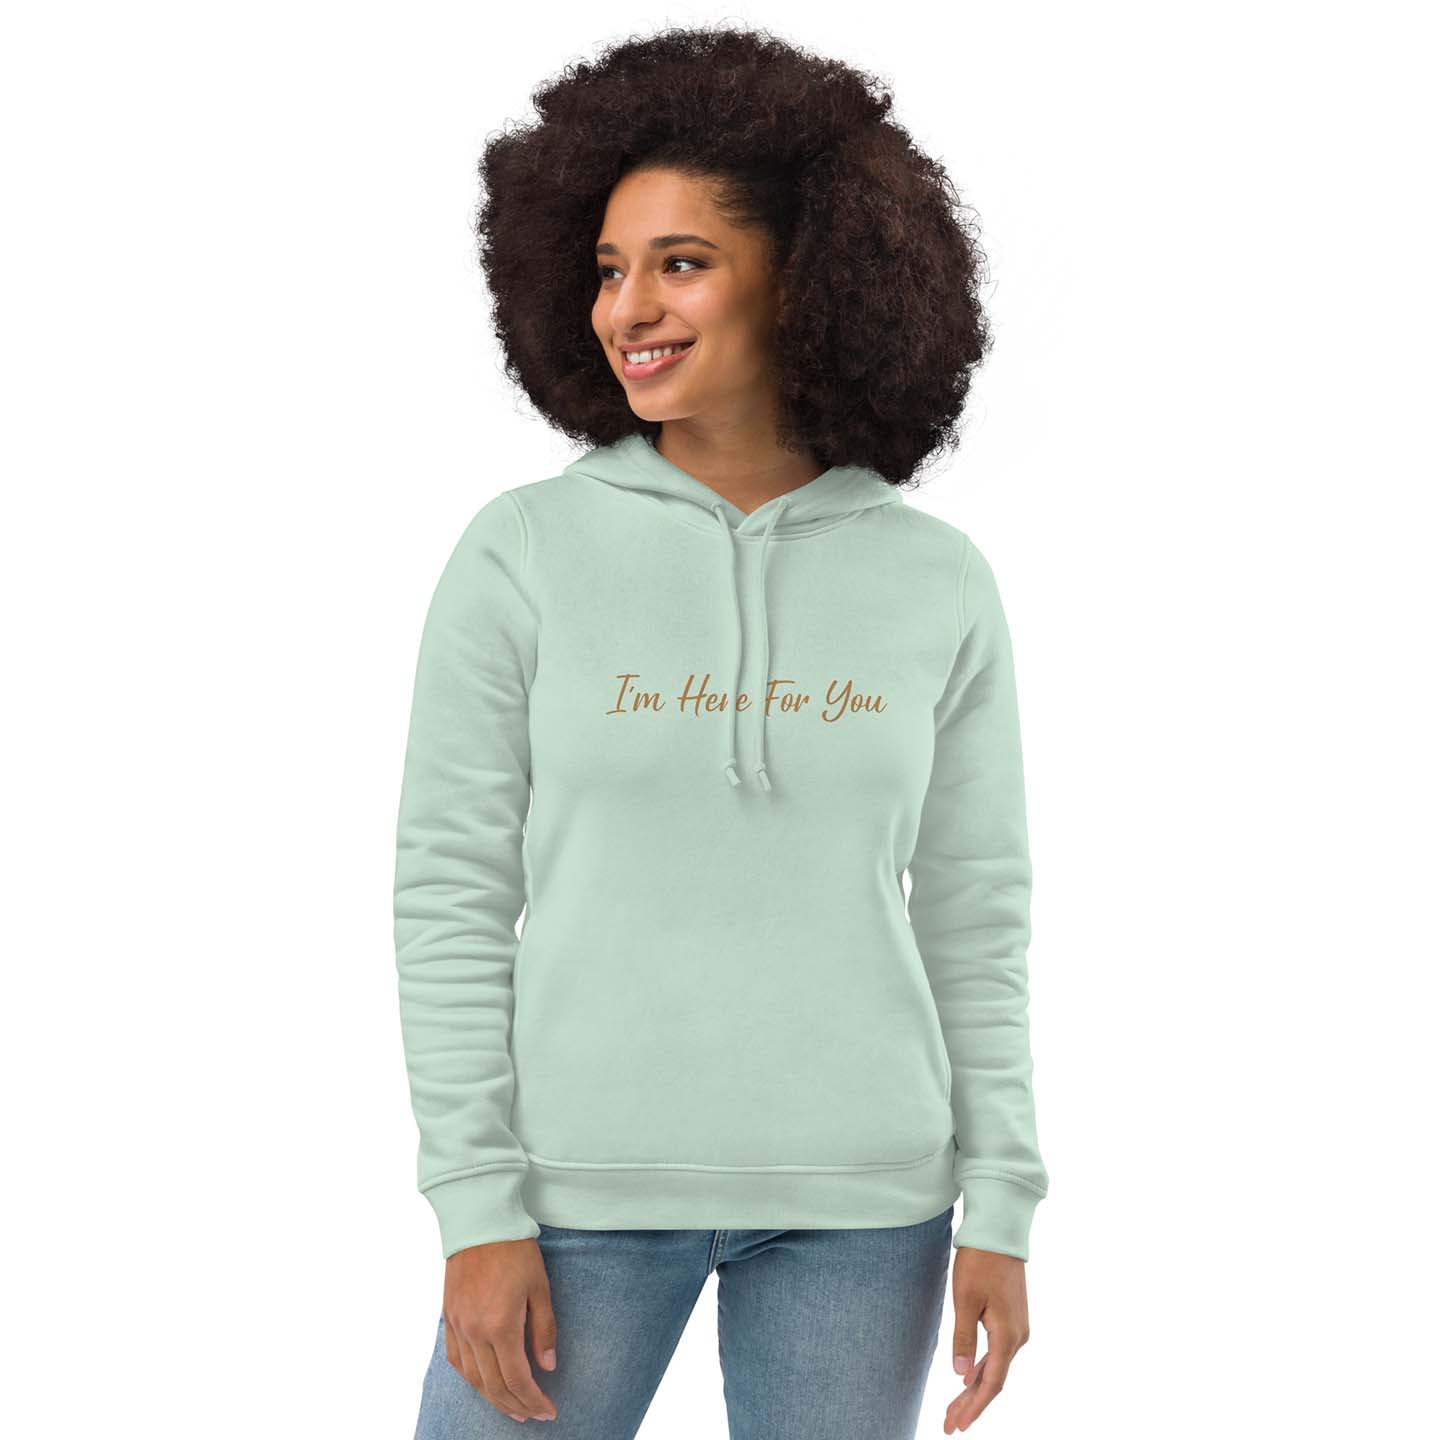 Women green inspirational hoodie with inspirational quote, "I'm Here For You."